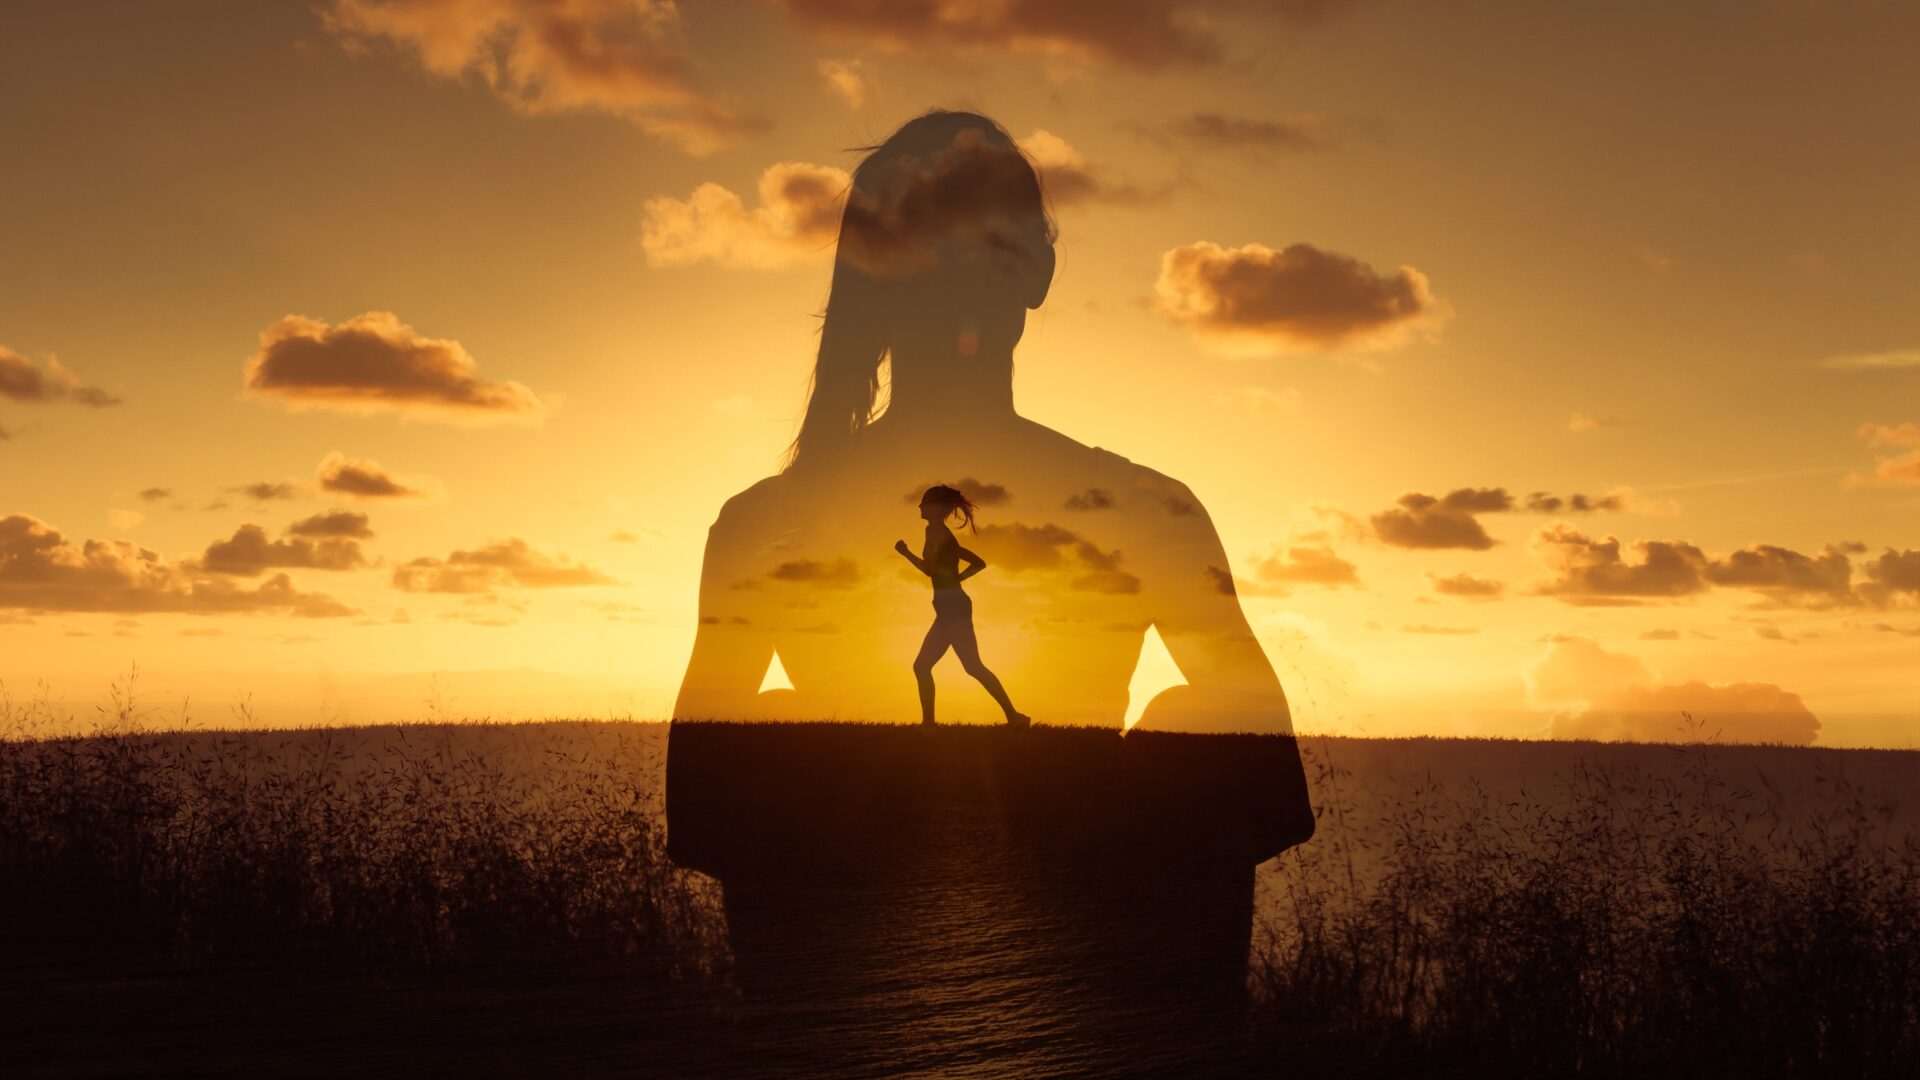 Composite image of a woman running at sunset through a silhouette of her sitting